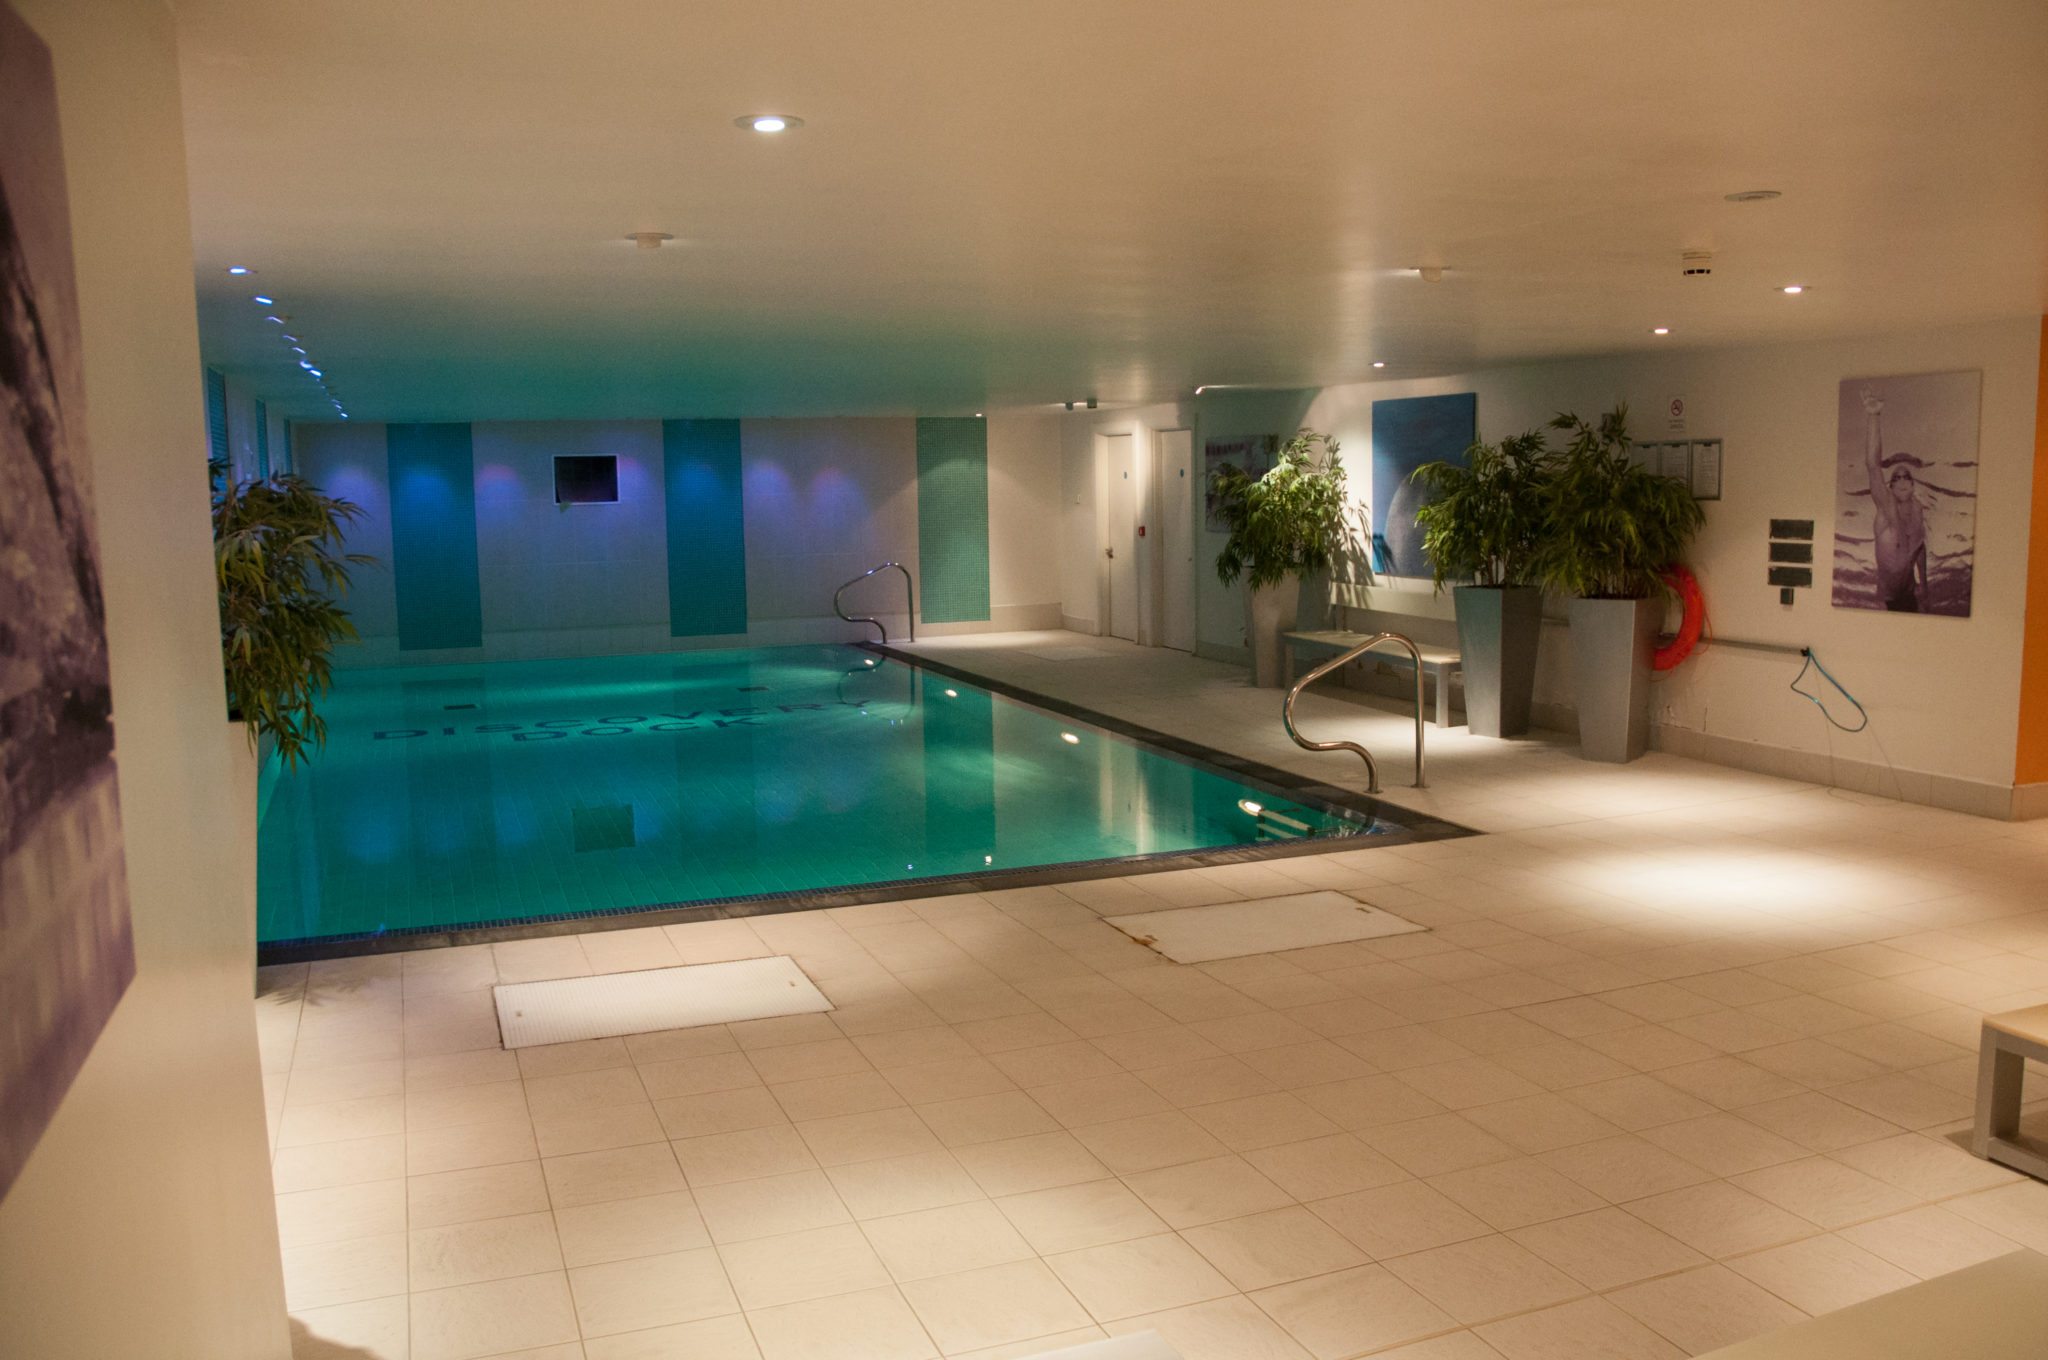 Serviced-Accommodation-in-Canary-Wharf-|-Executive-Serviced-Apartments-London-|-Corporate-Housing-|-Relocation-|-Award-Winning-&-Quality-Accredited-|-Pool,-Gym,-Concierge,-lift-|-BOOK---NOW---Urban-Stay